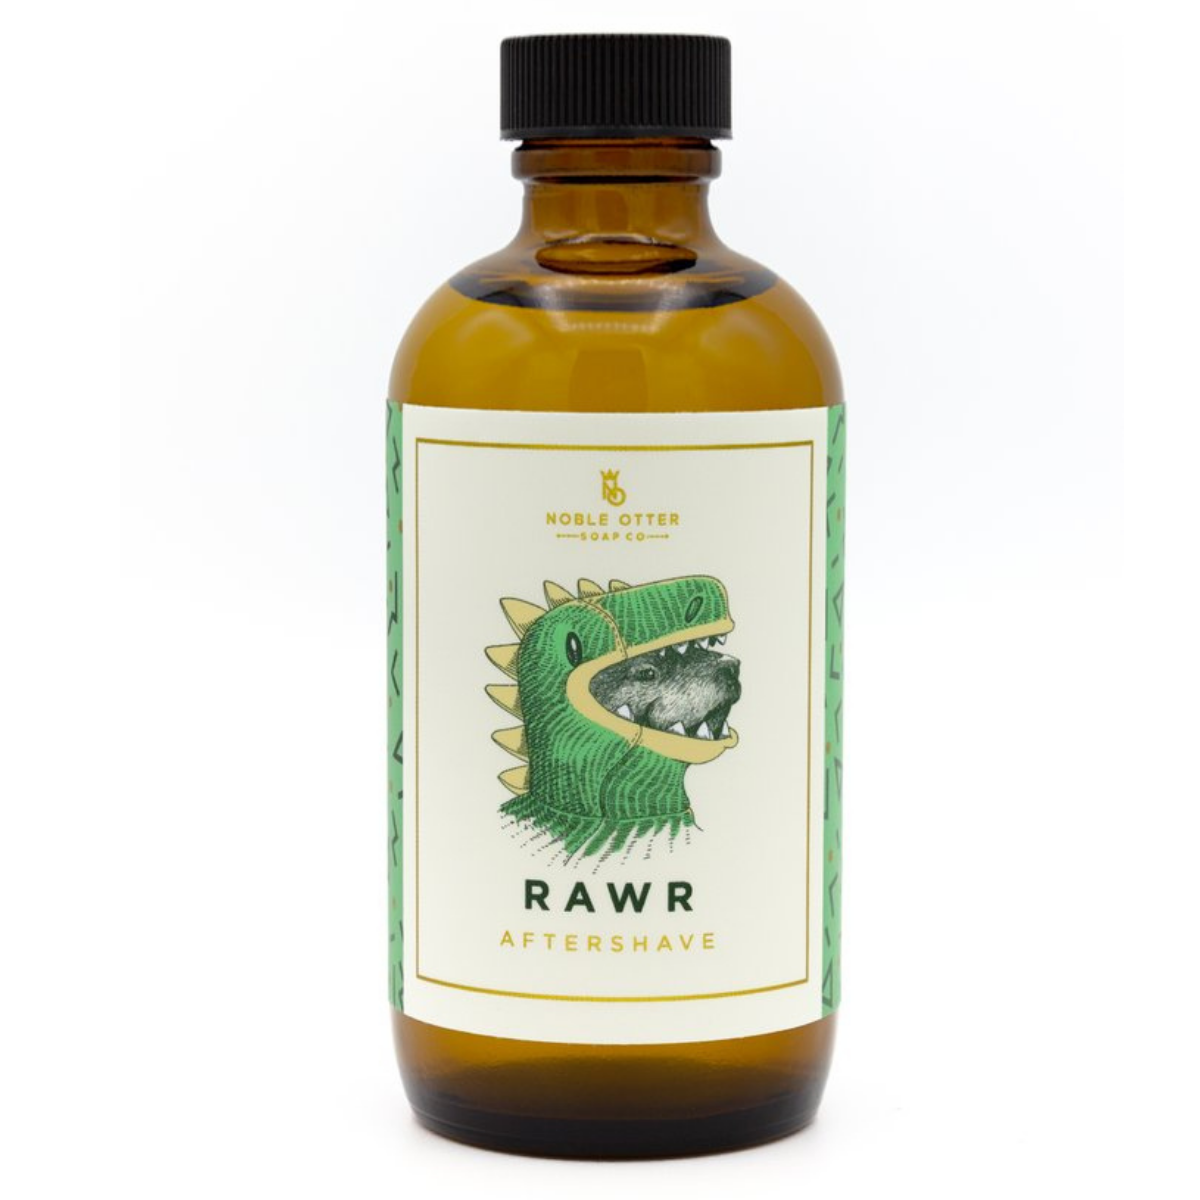 Primary Image of Rawr Aftershave